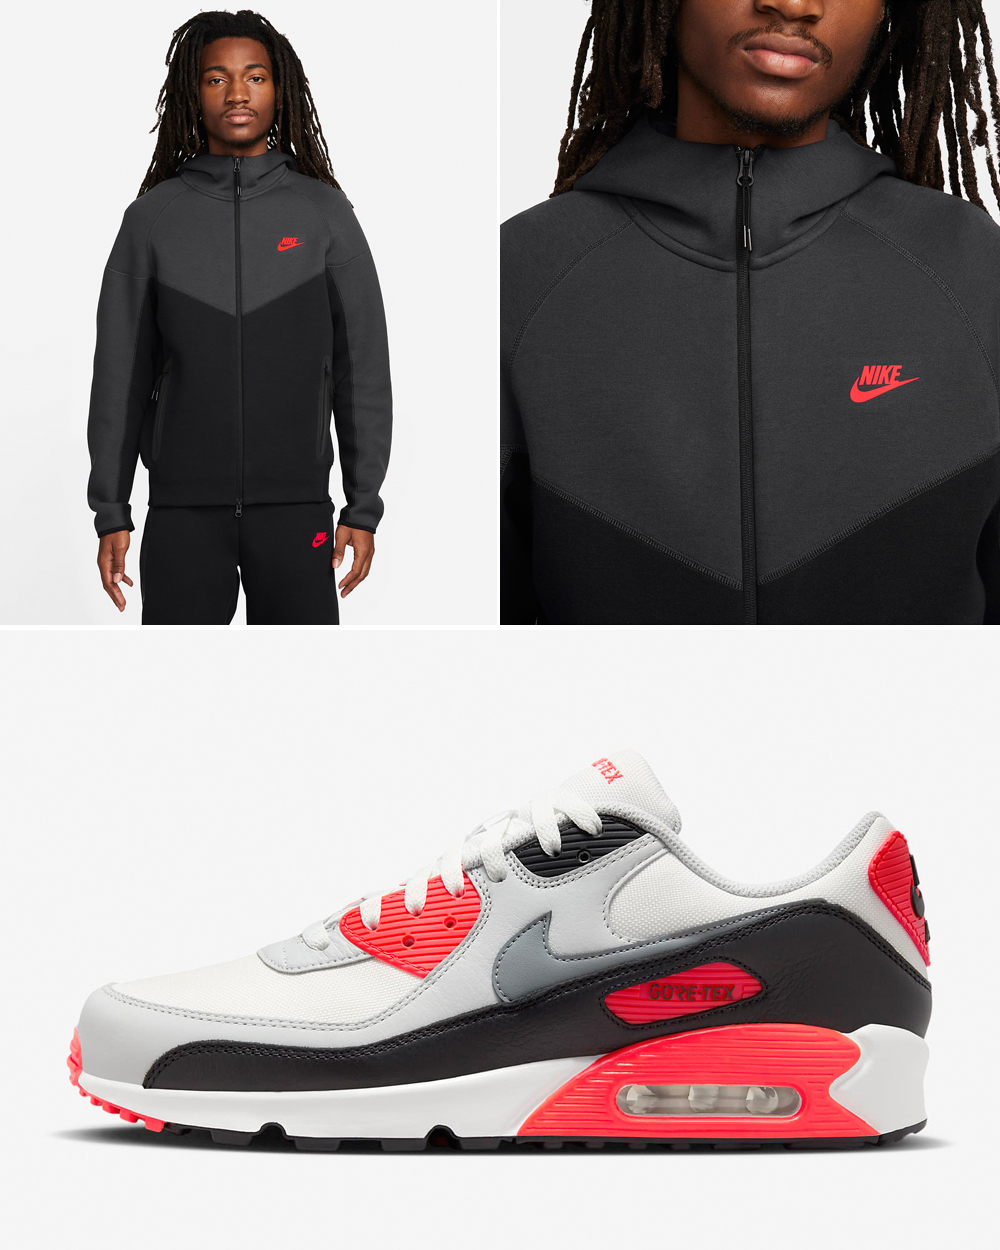 Nike-Air-Max-90-Gore-Tex-Infrared-Outfit